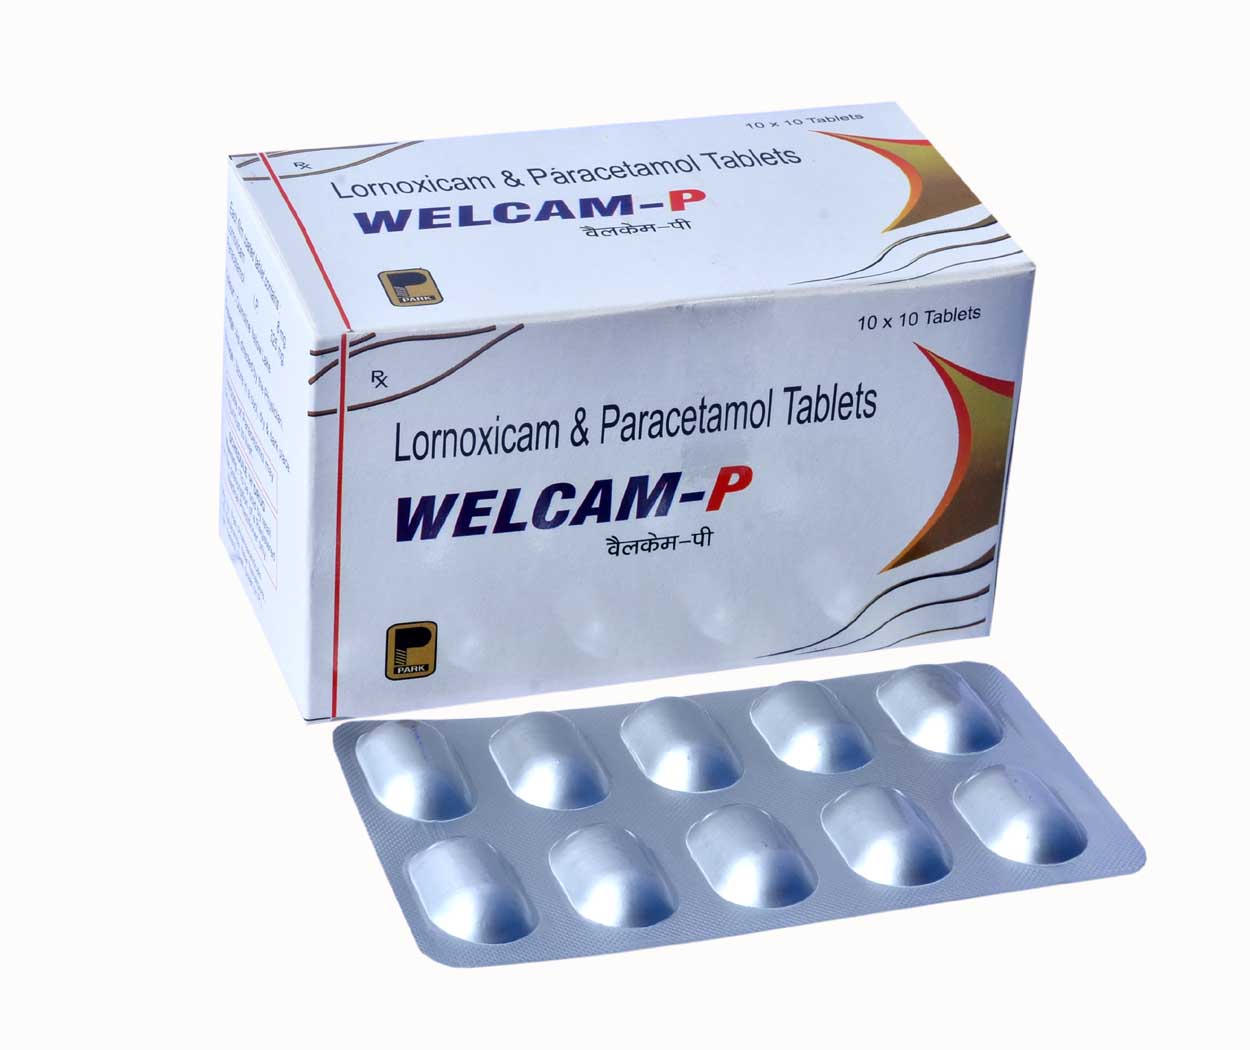 Product Name: WELCAM P, Compositions of WELCAM P are Lornoxicam & Paracetamol Tablets - Park Pharmaceuticals